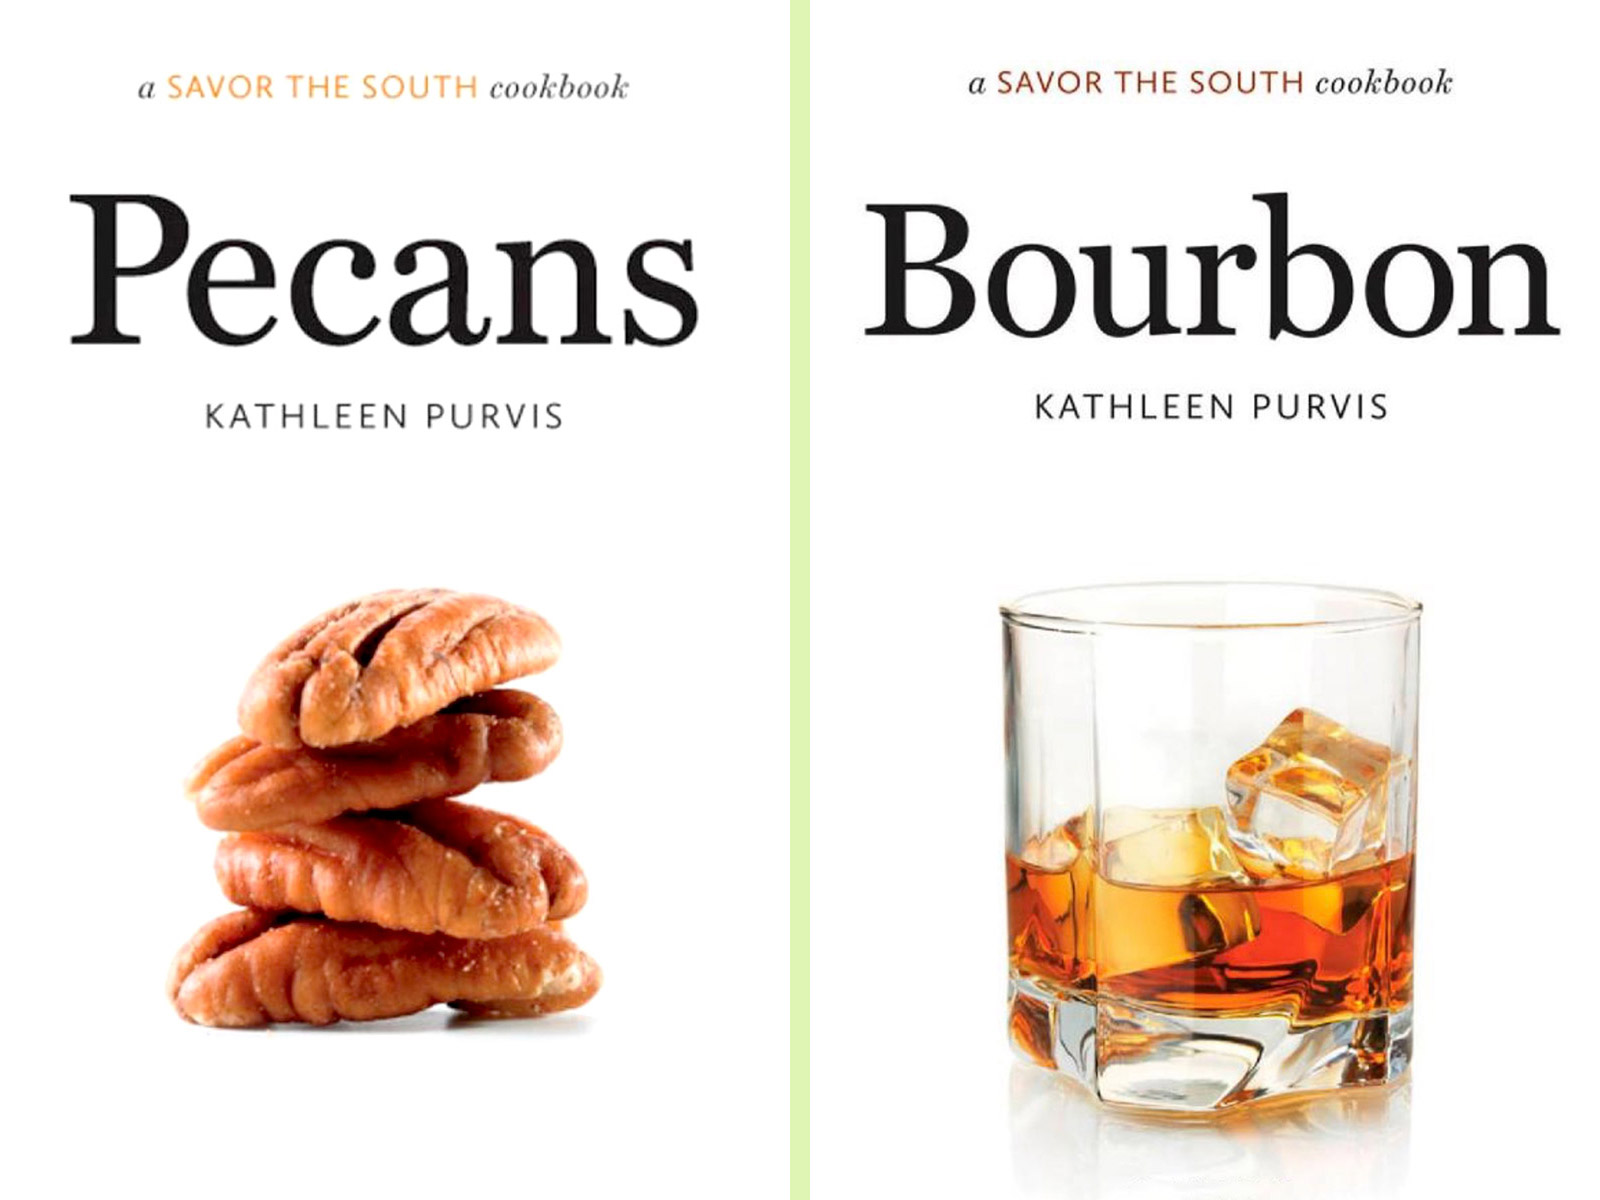 Pecans and Bourbon by Kathleen Purvis